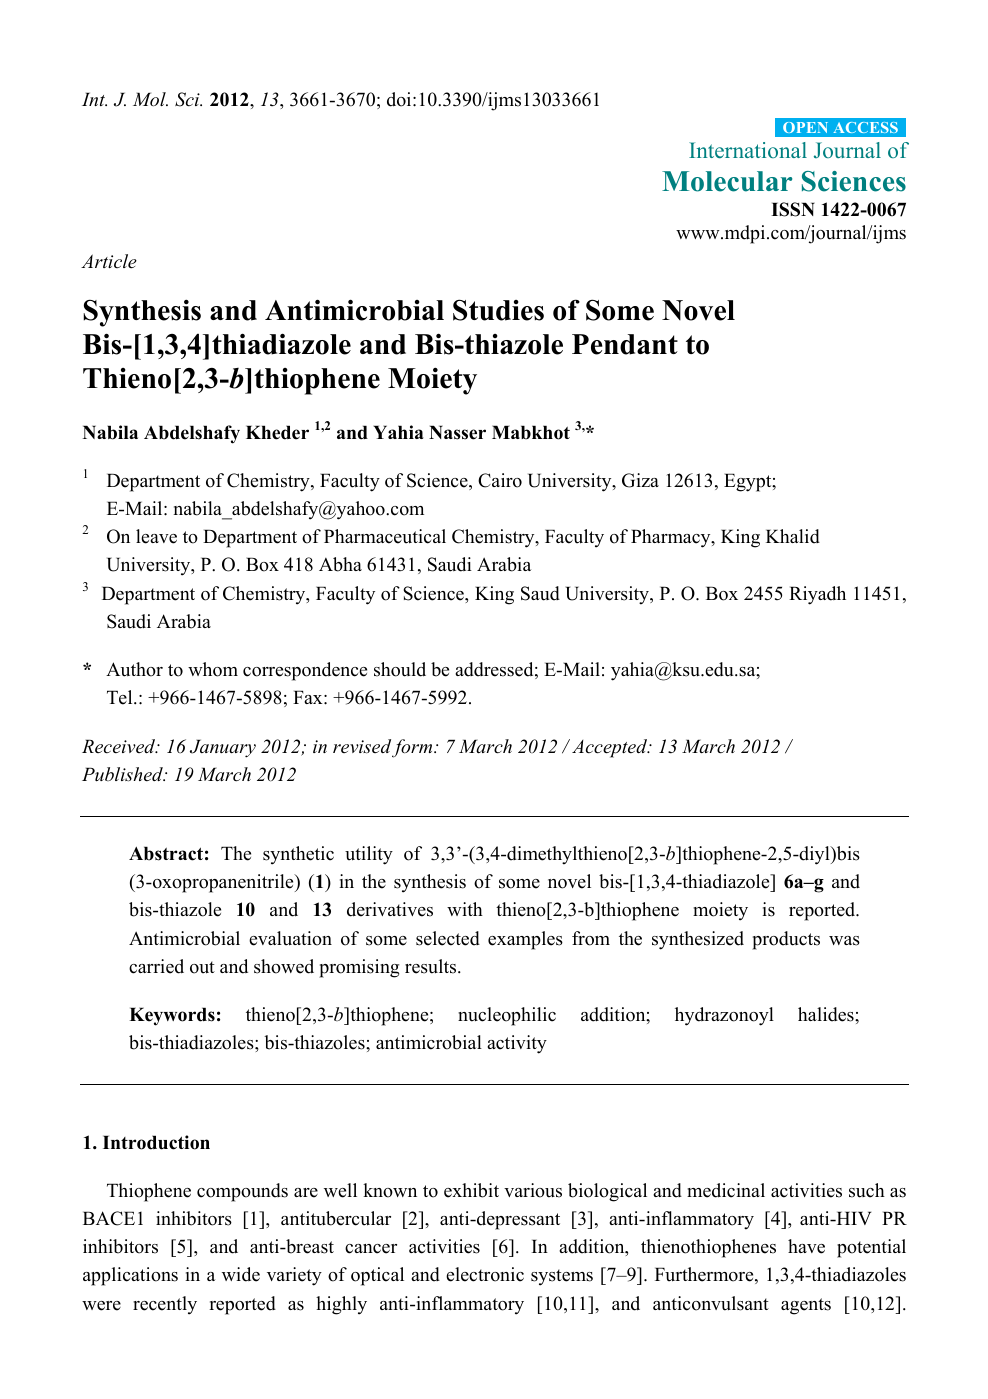 Synthesis And Antimicrobial Studies Of Some Novel Bis 1 3 4 Thiadiazole And Bis Thiazole Pendant To Thieno 2 3 B Thiophene Moiety Topic Of Research Paper In Chemical Sciences Download Scholarly Article Pdf And Read For Free On Cyberleninka